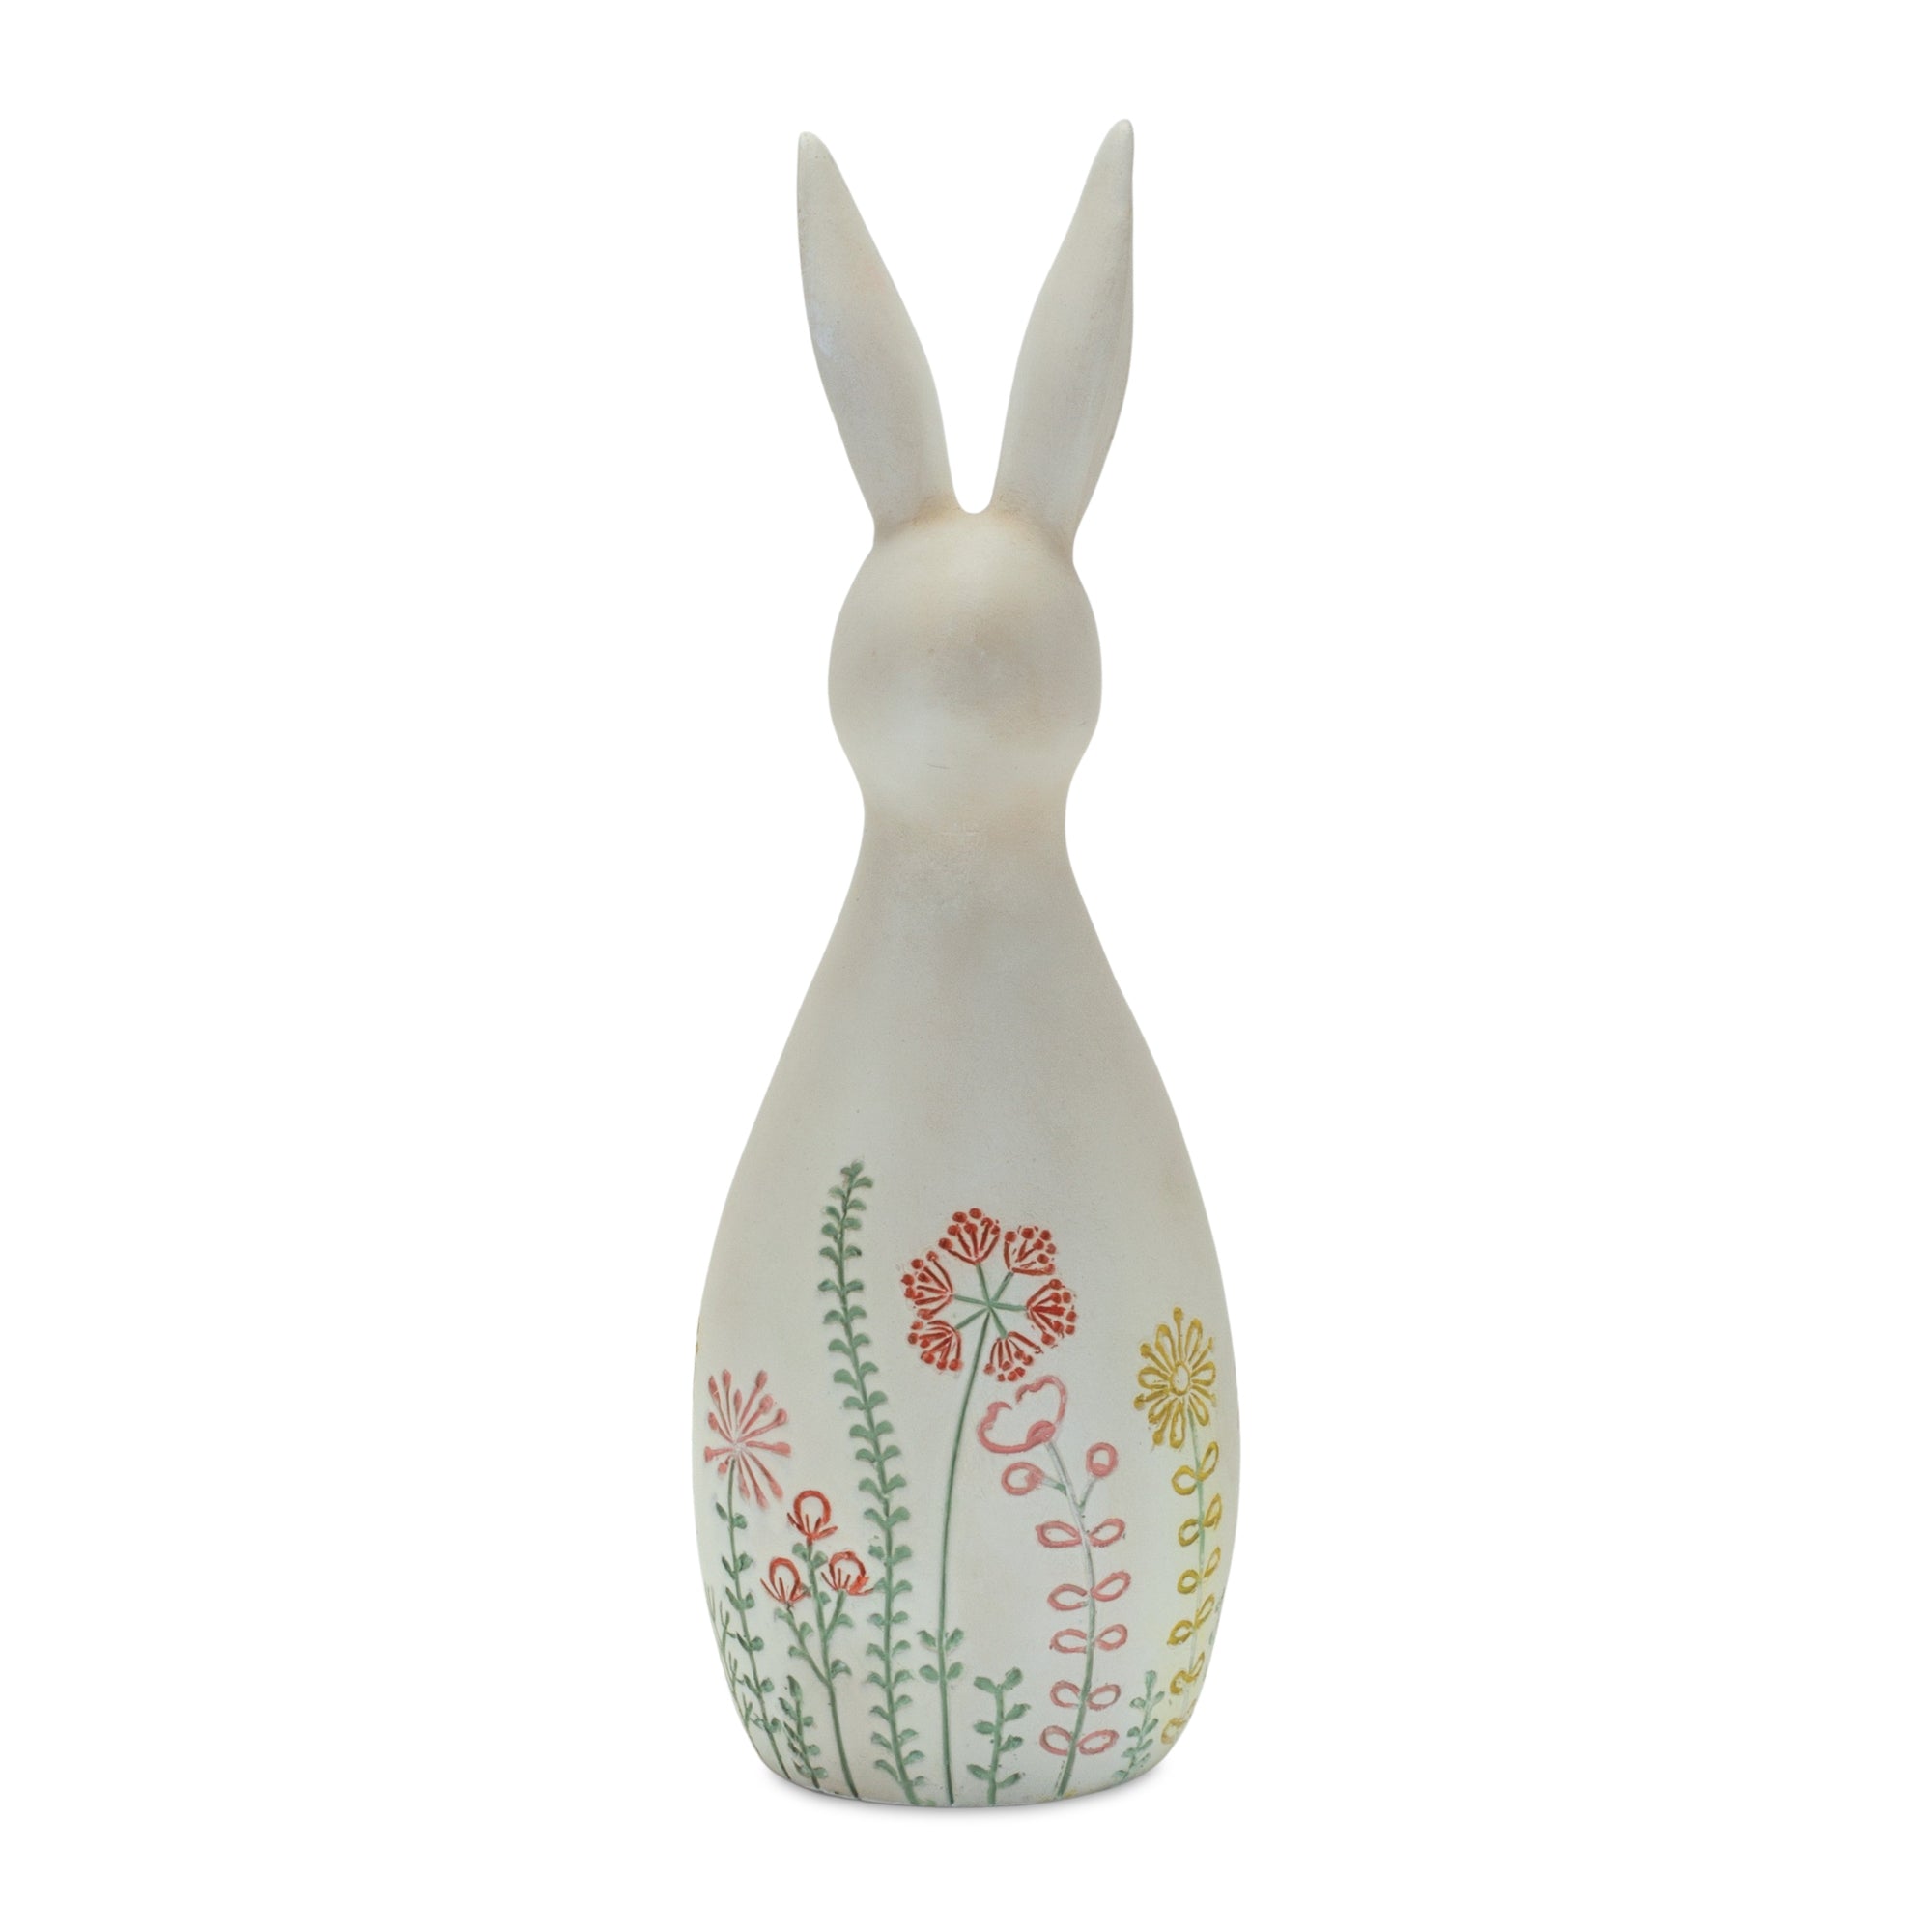 Modern Bunny Rabbit Figurine with Etched Floral Design (Set of 2) - Outdoor Decor